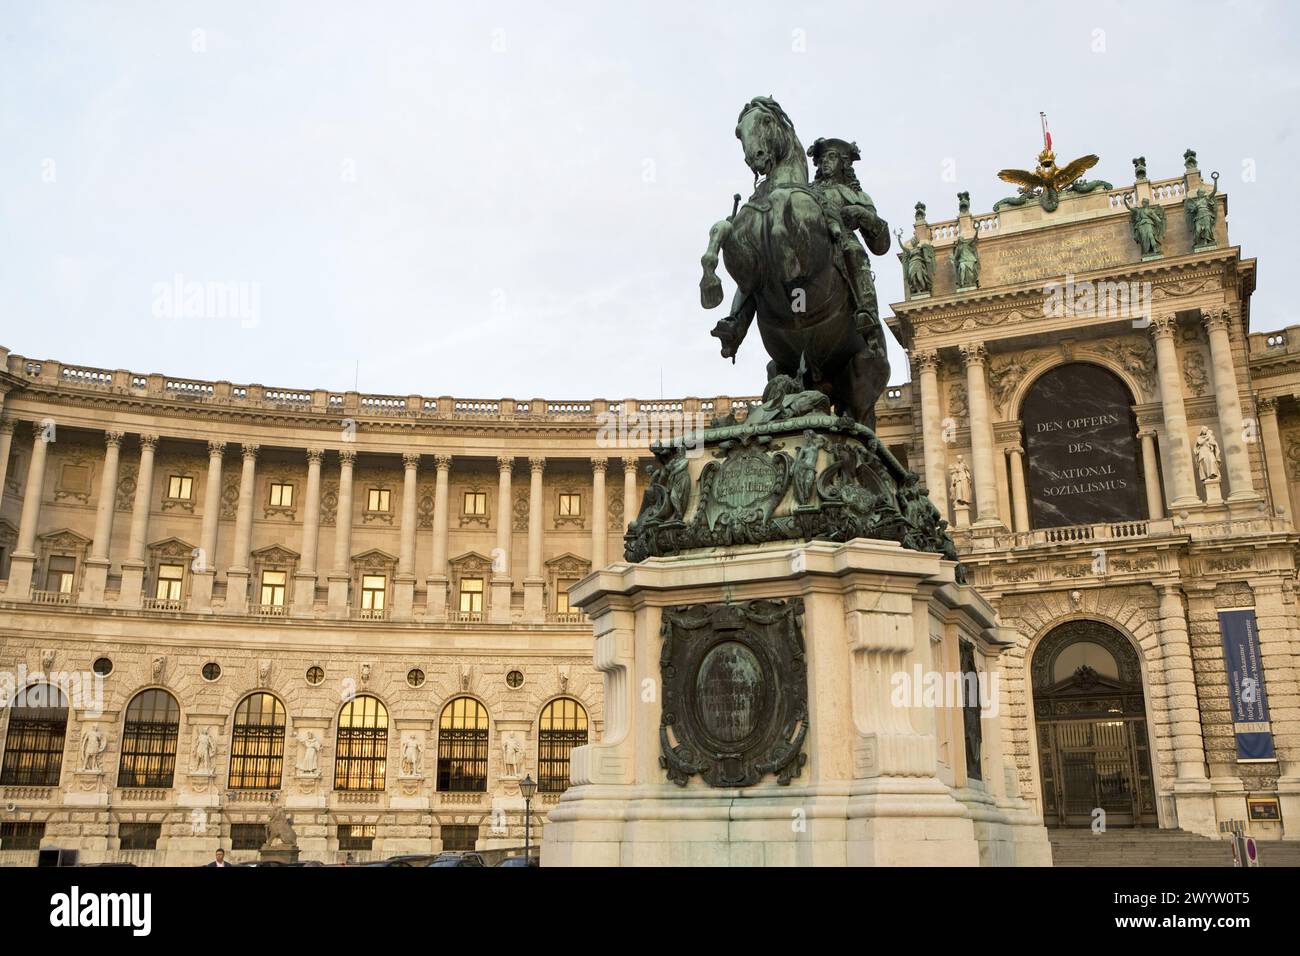 Statue of Prince Eugene of Savoy in front of Hofburg Imperial Palace seen from Heldenplatz, Vienna. Austria. Stock Photo